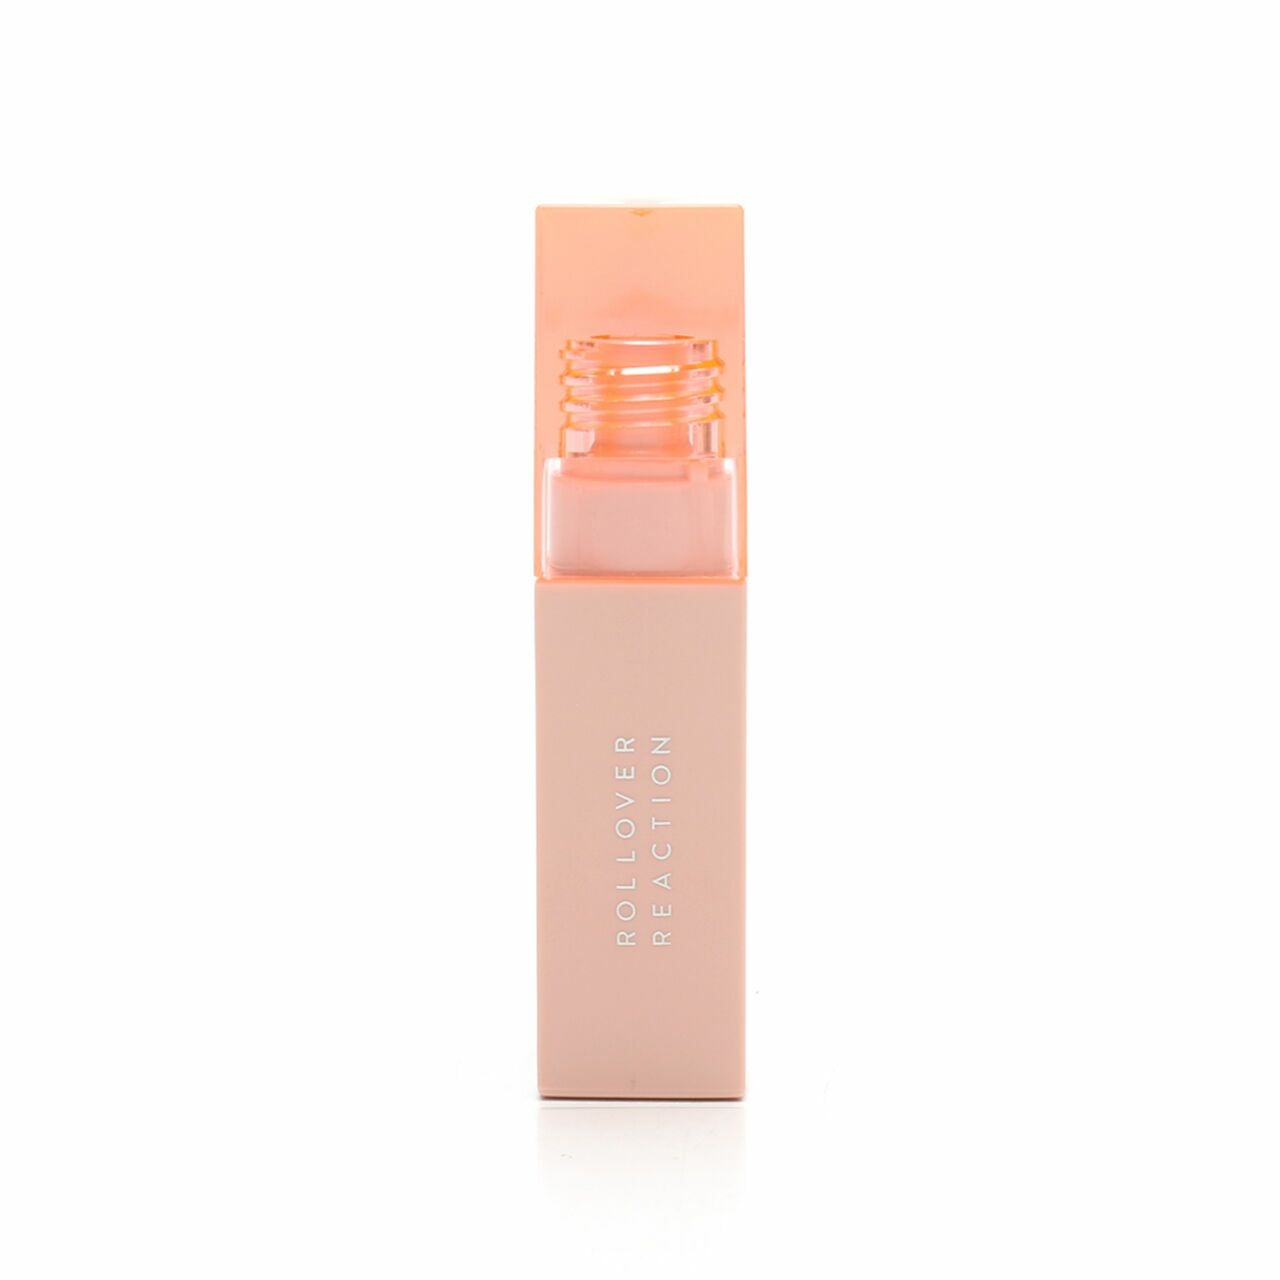 Rollover Reaction DEWDROP! Lip and Cheek Tint Lips